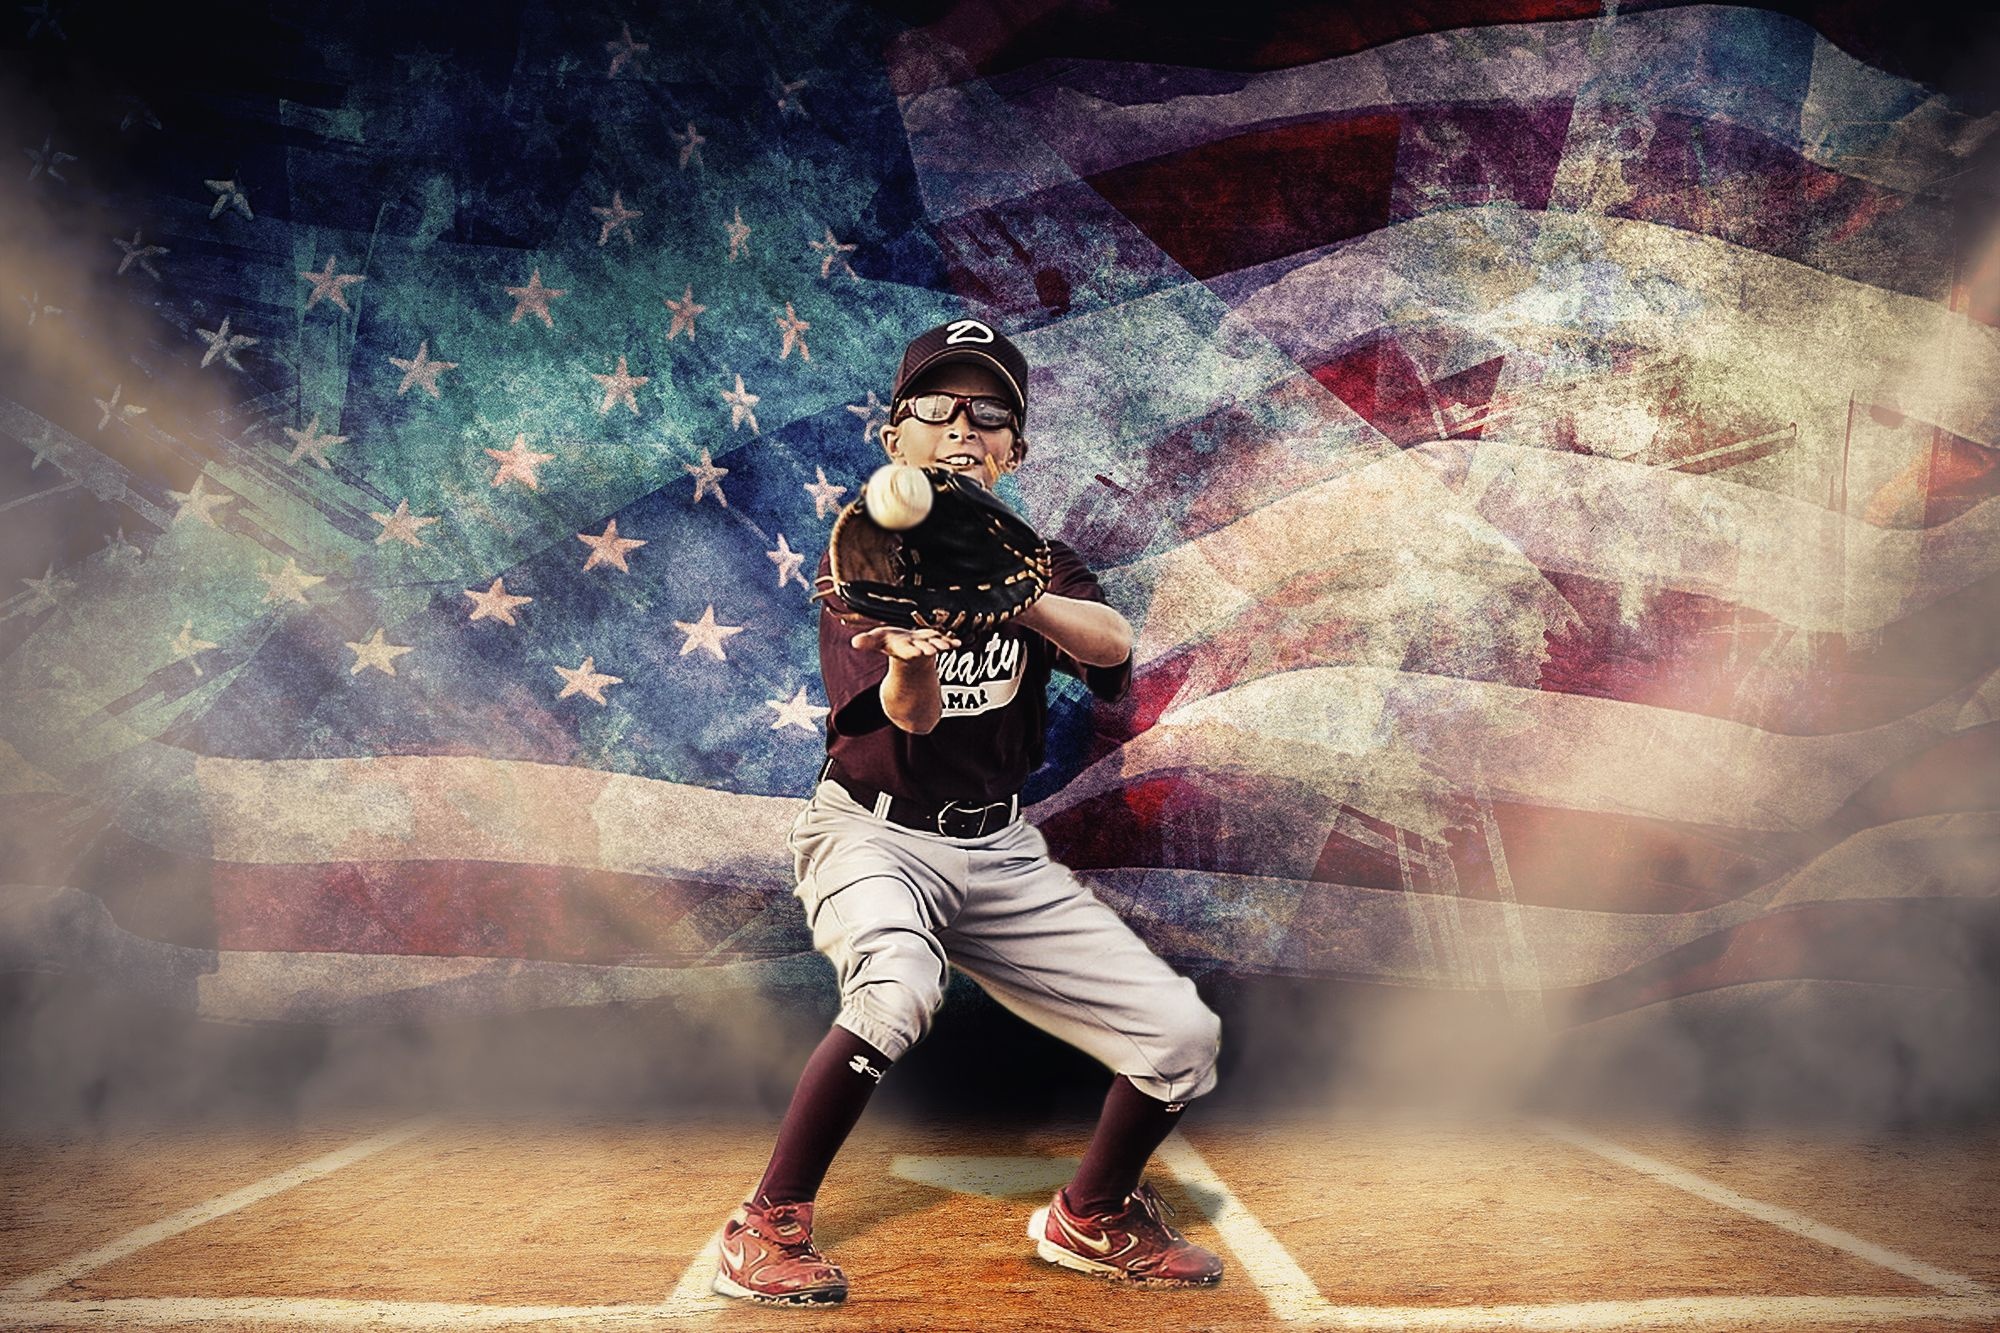 Softball: American bat-and-ball game, The United States national team. 2000x1340 HD Wallpaper.